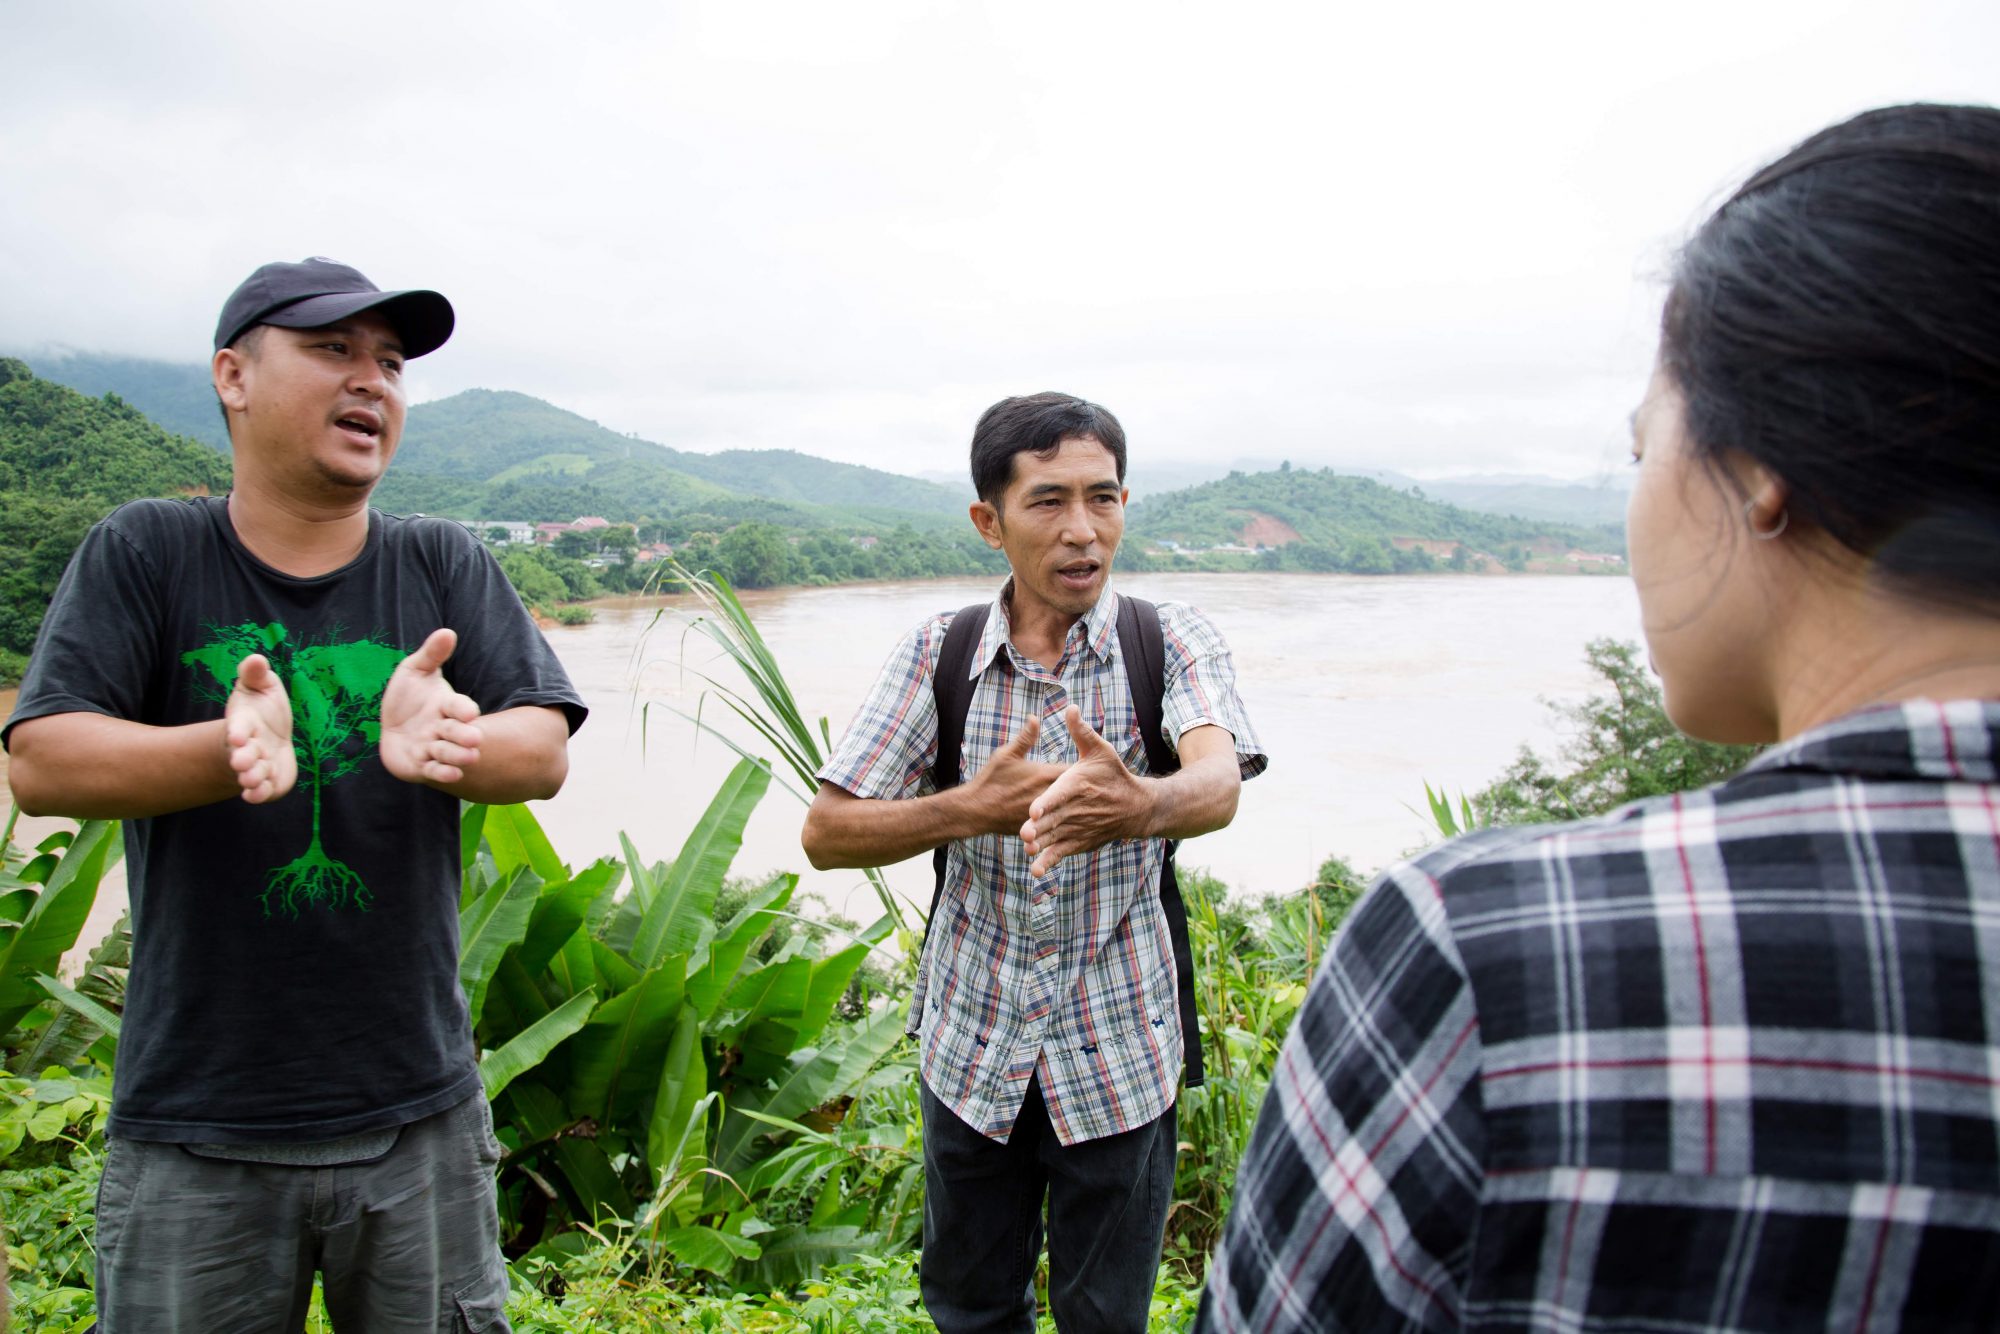 Jeerasak Inthayod, a member of Rak Chiang Khong, and Neung, ERI Mekong Legal Associate, explains how the Khon Pi Luang rapid is very important for local people’s livelihoods. Jeerasak described how Khon Pi Luang marks a narrow section of the Mekong River, well-known among local fishermen as a place where giant catfish lay their eggs. In dry season, local people collect kai – an eatable river weed that provides a vital source of income for many families.